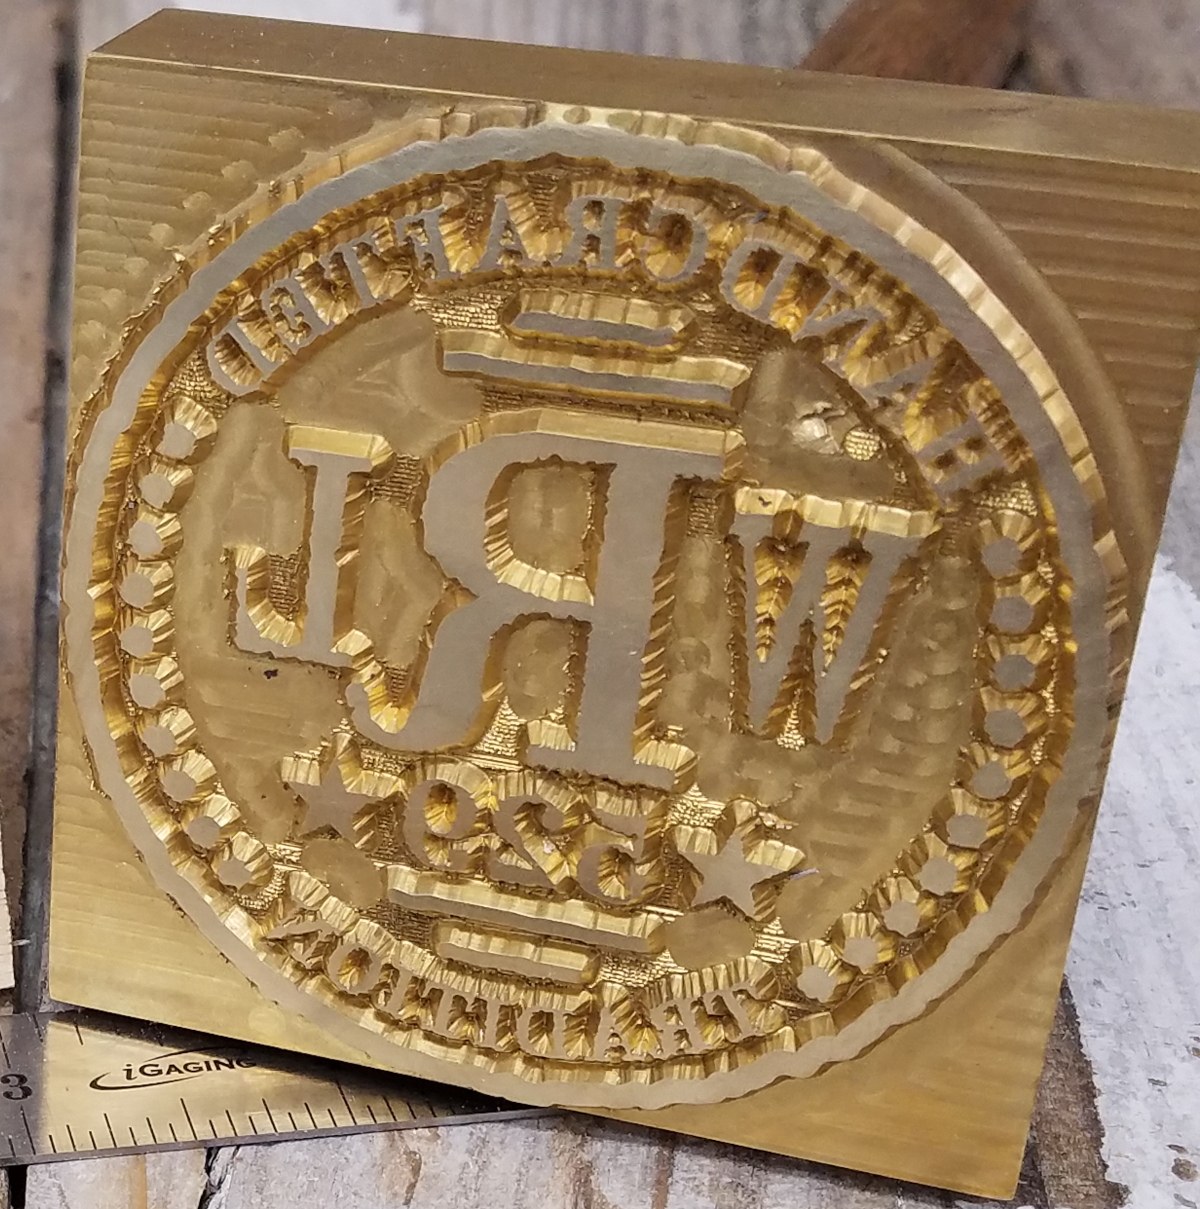 Custom Branding Iron for Wood - Made in USA by Yeltrowshop LLC